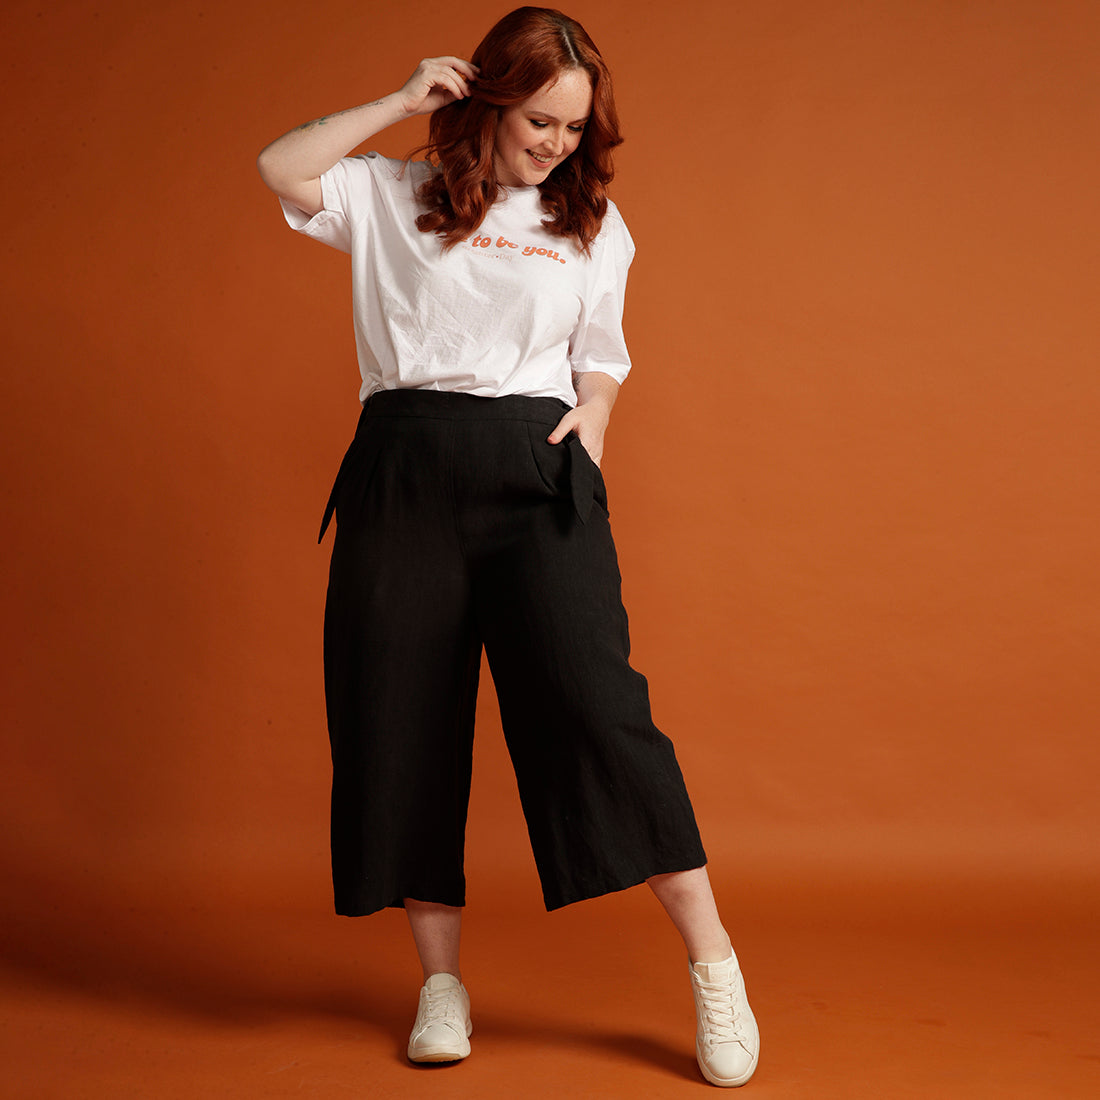 Red-haired woman in black womens culottes